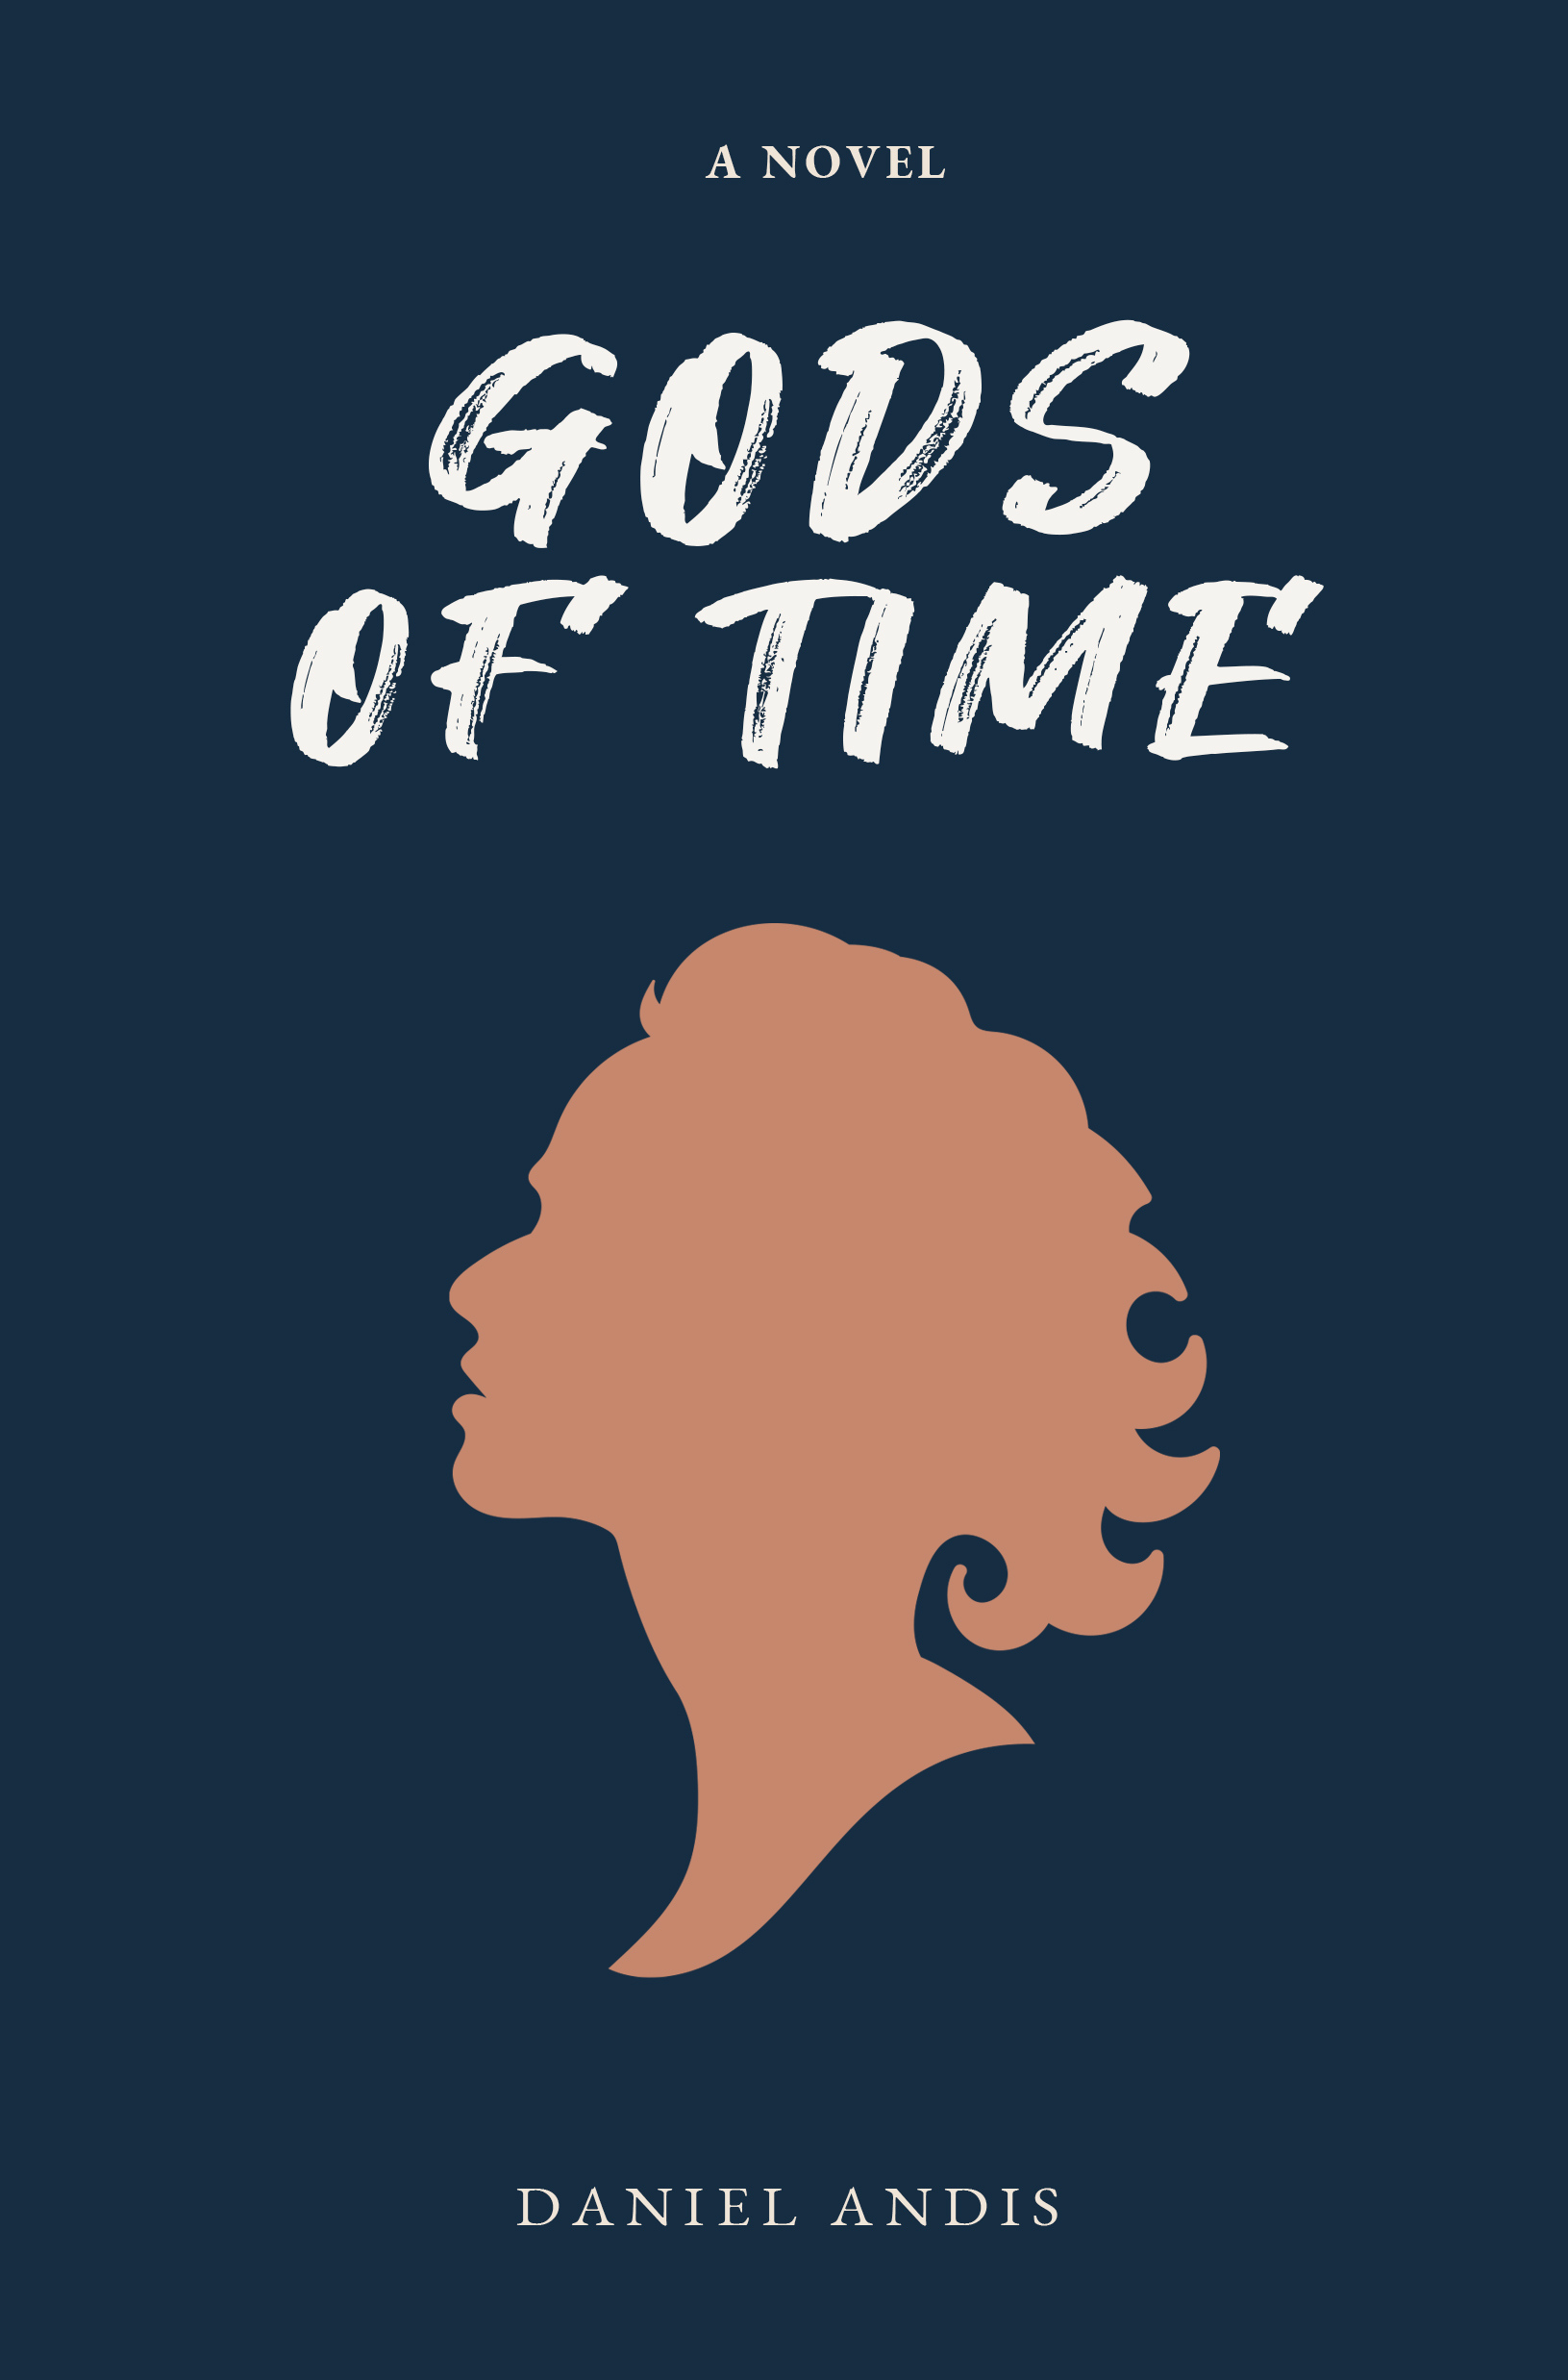 GODS OF TIME